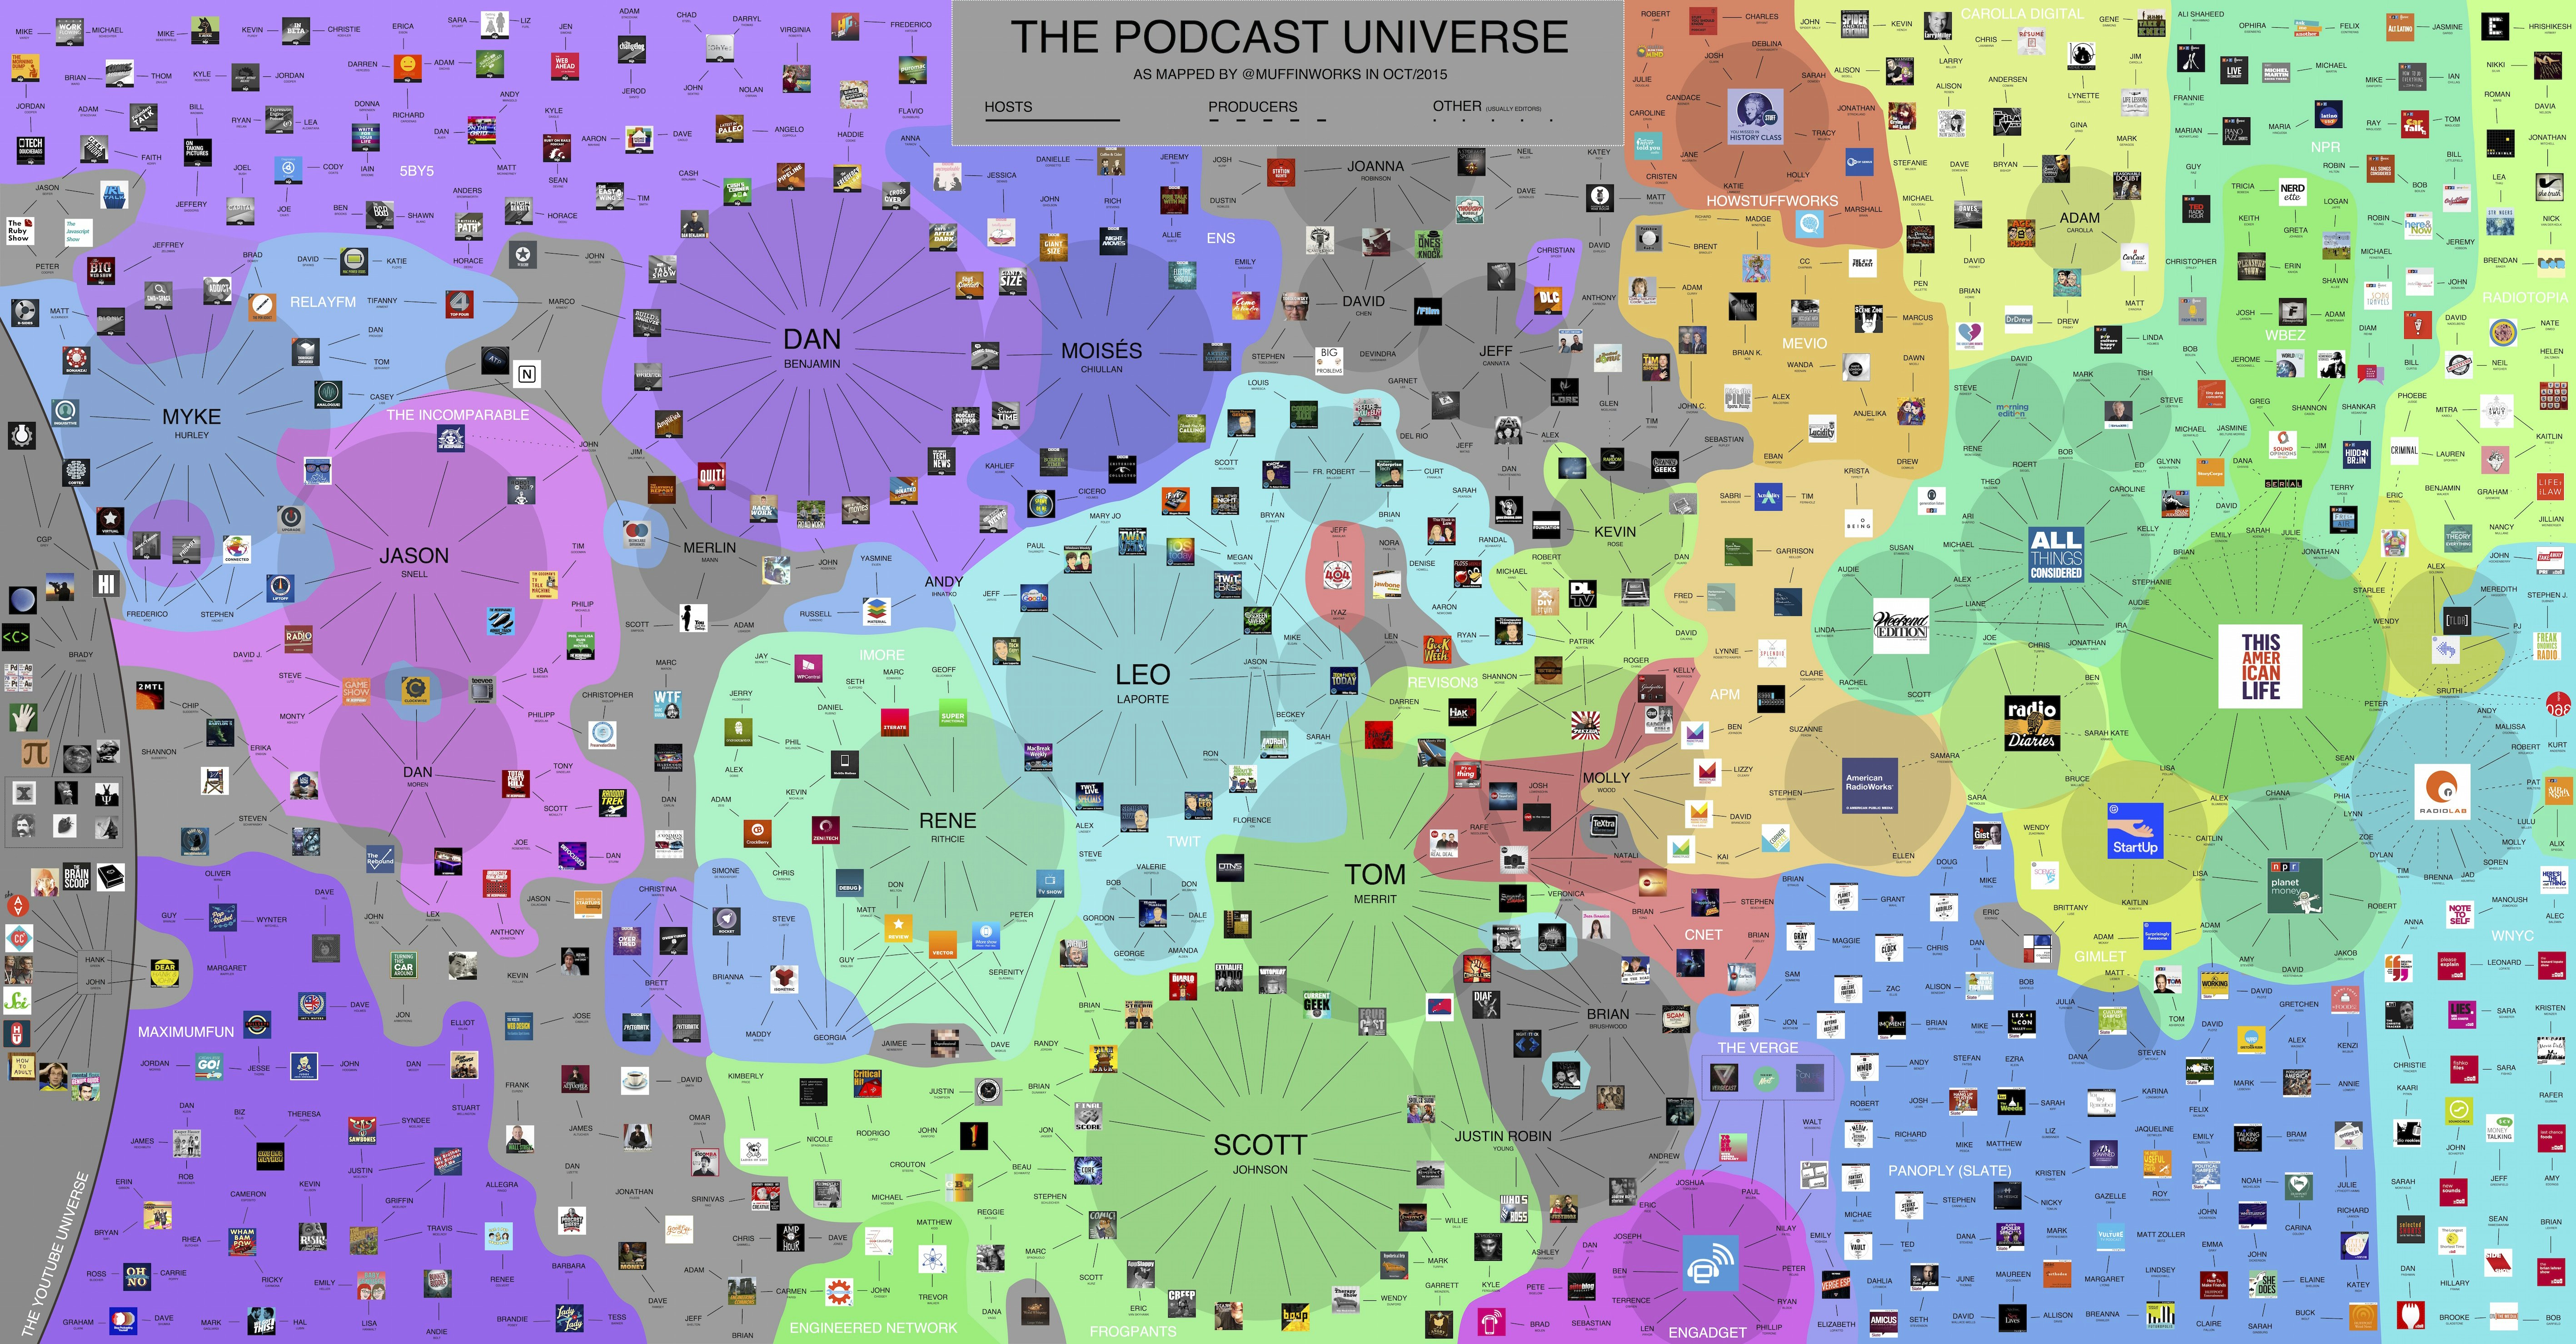 The Podcast Universe